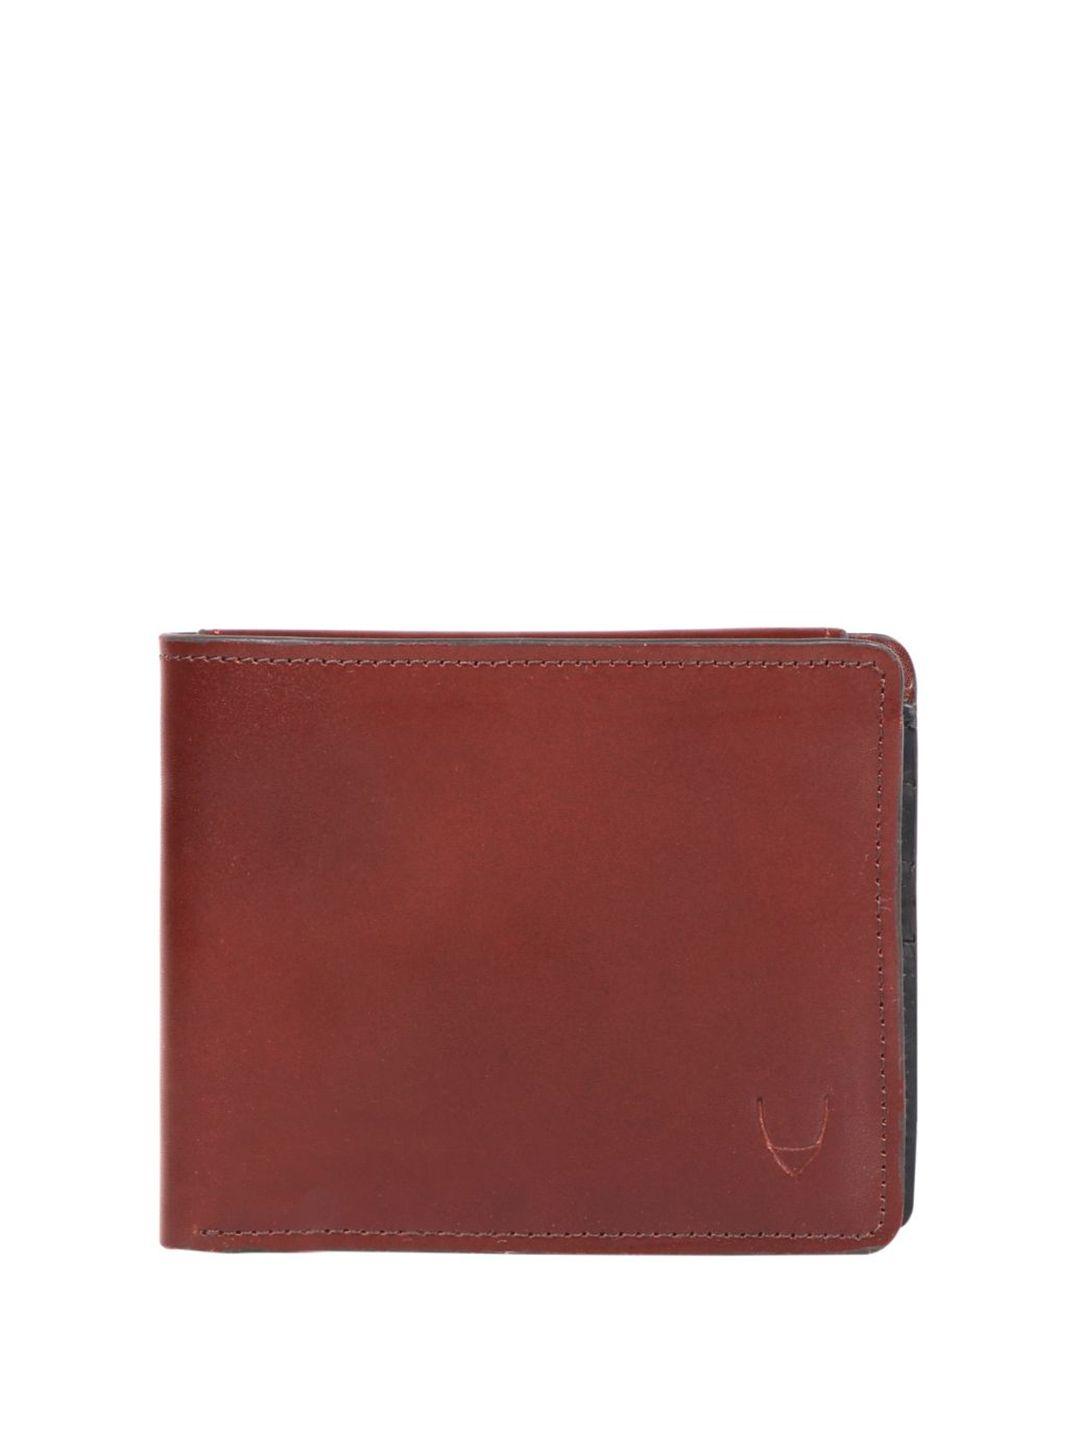 hidesign men leather two fold wallet